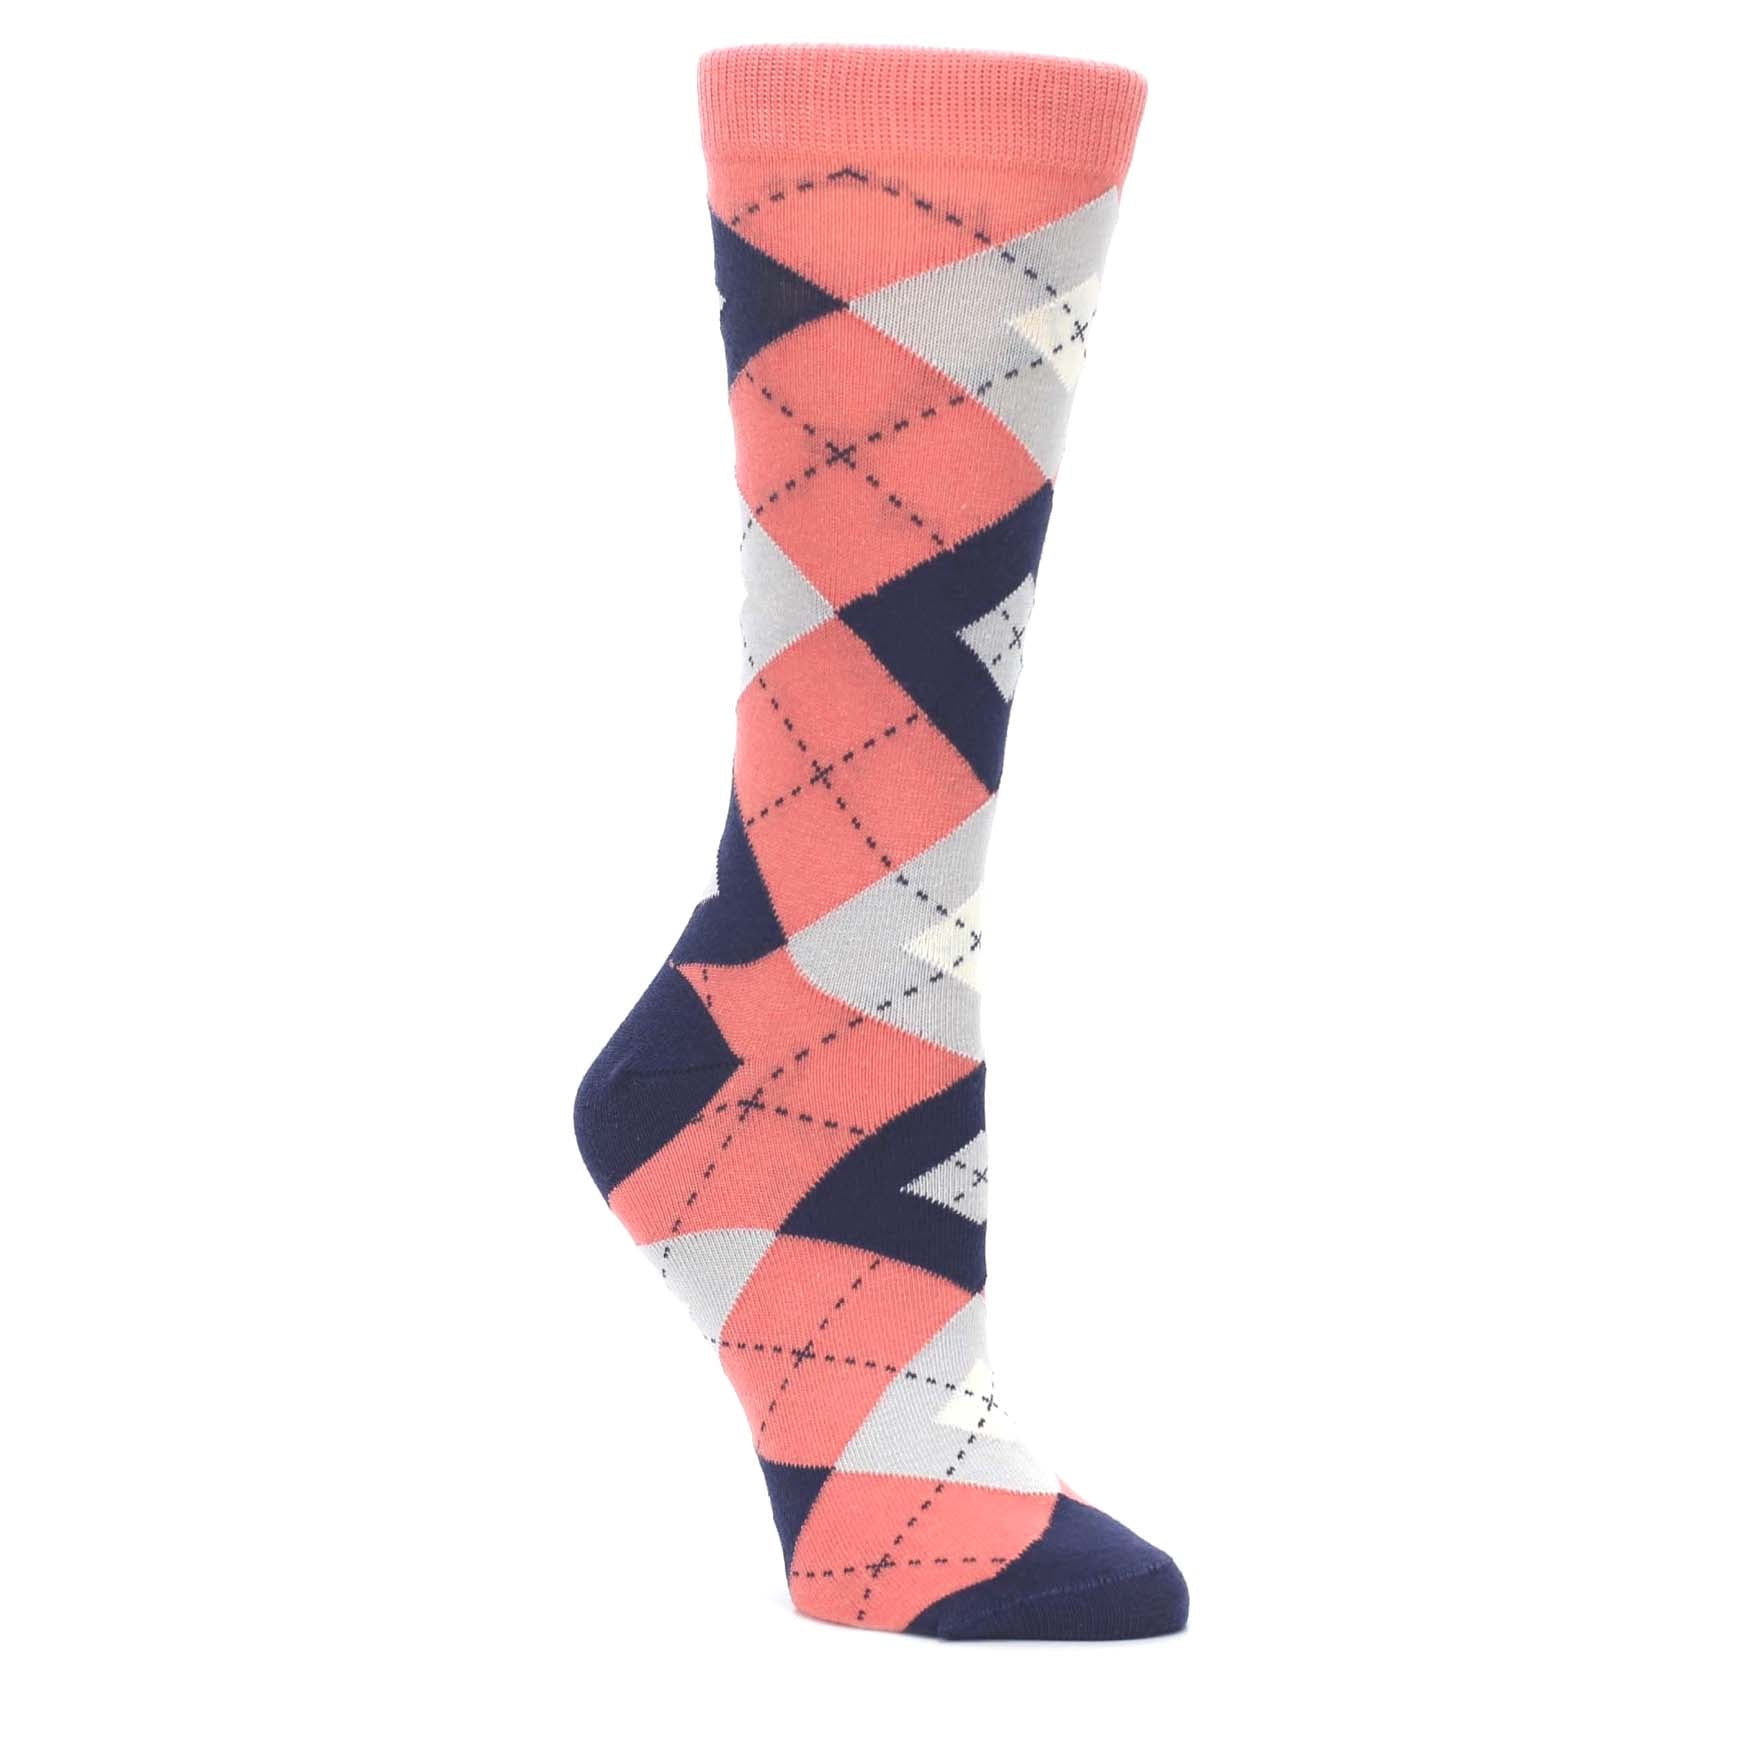 Coral and Navy Women's Argyle Socks